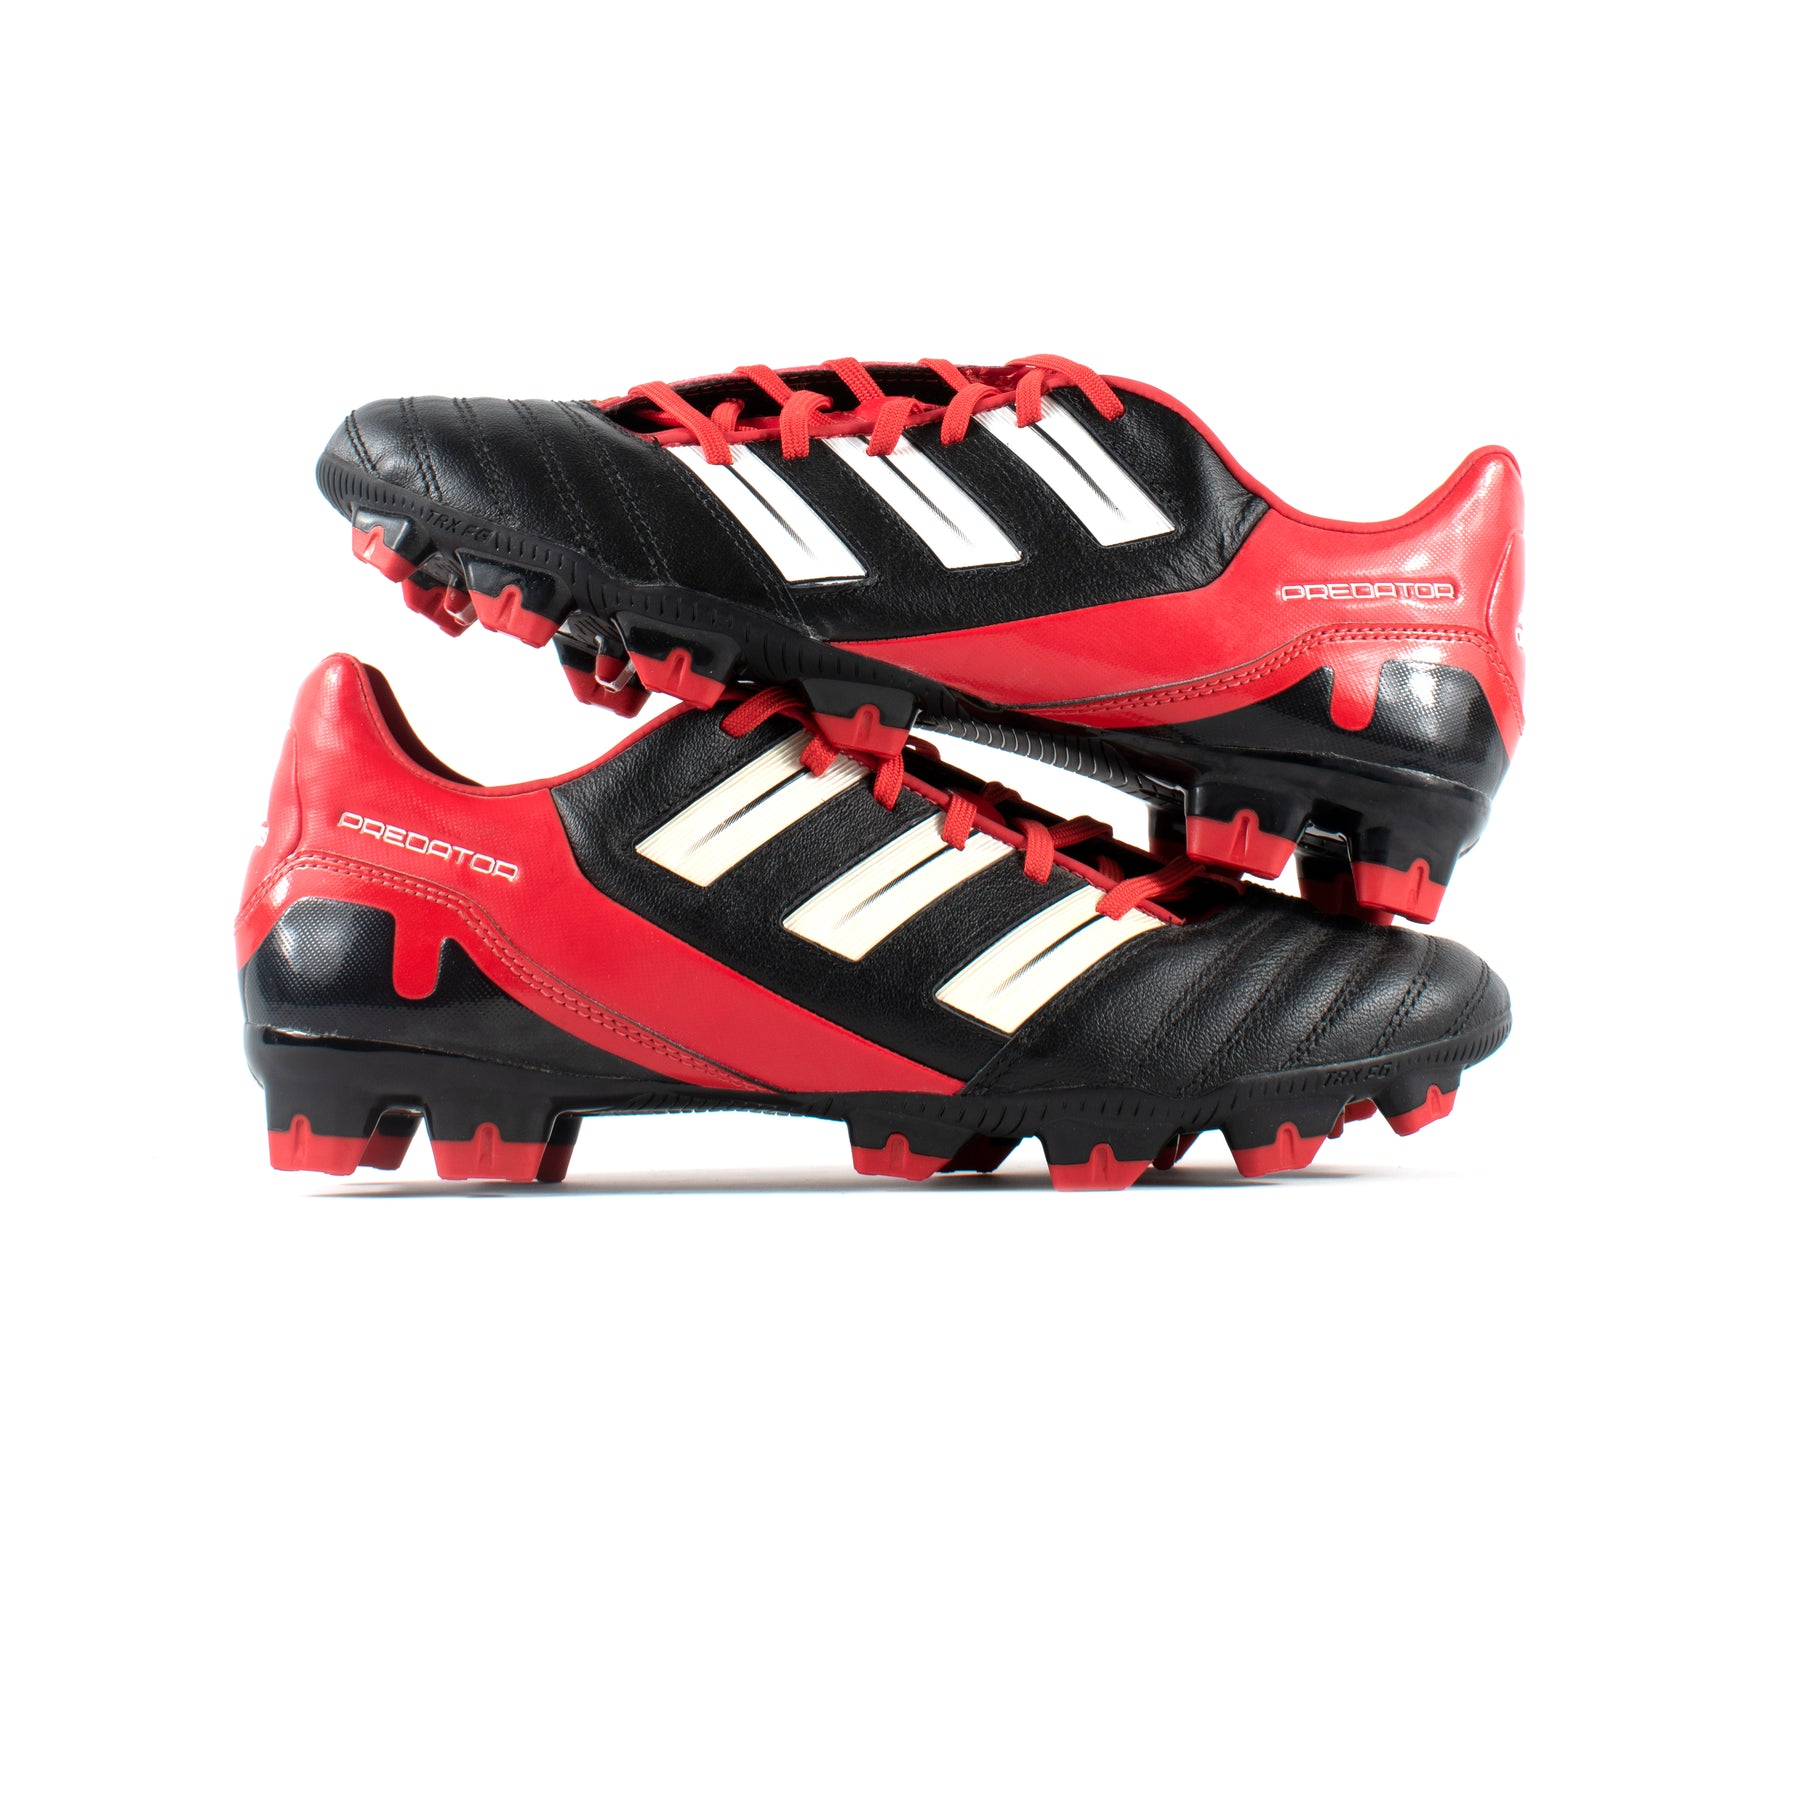 Adidas Predator Absolion Black Red FG – Classic Soccer Cleats